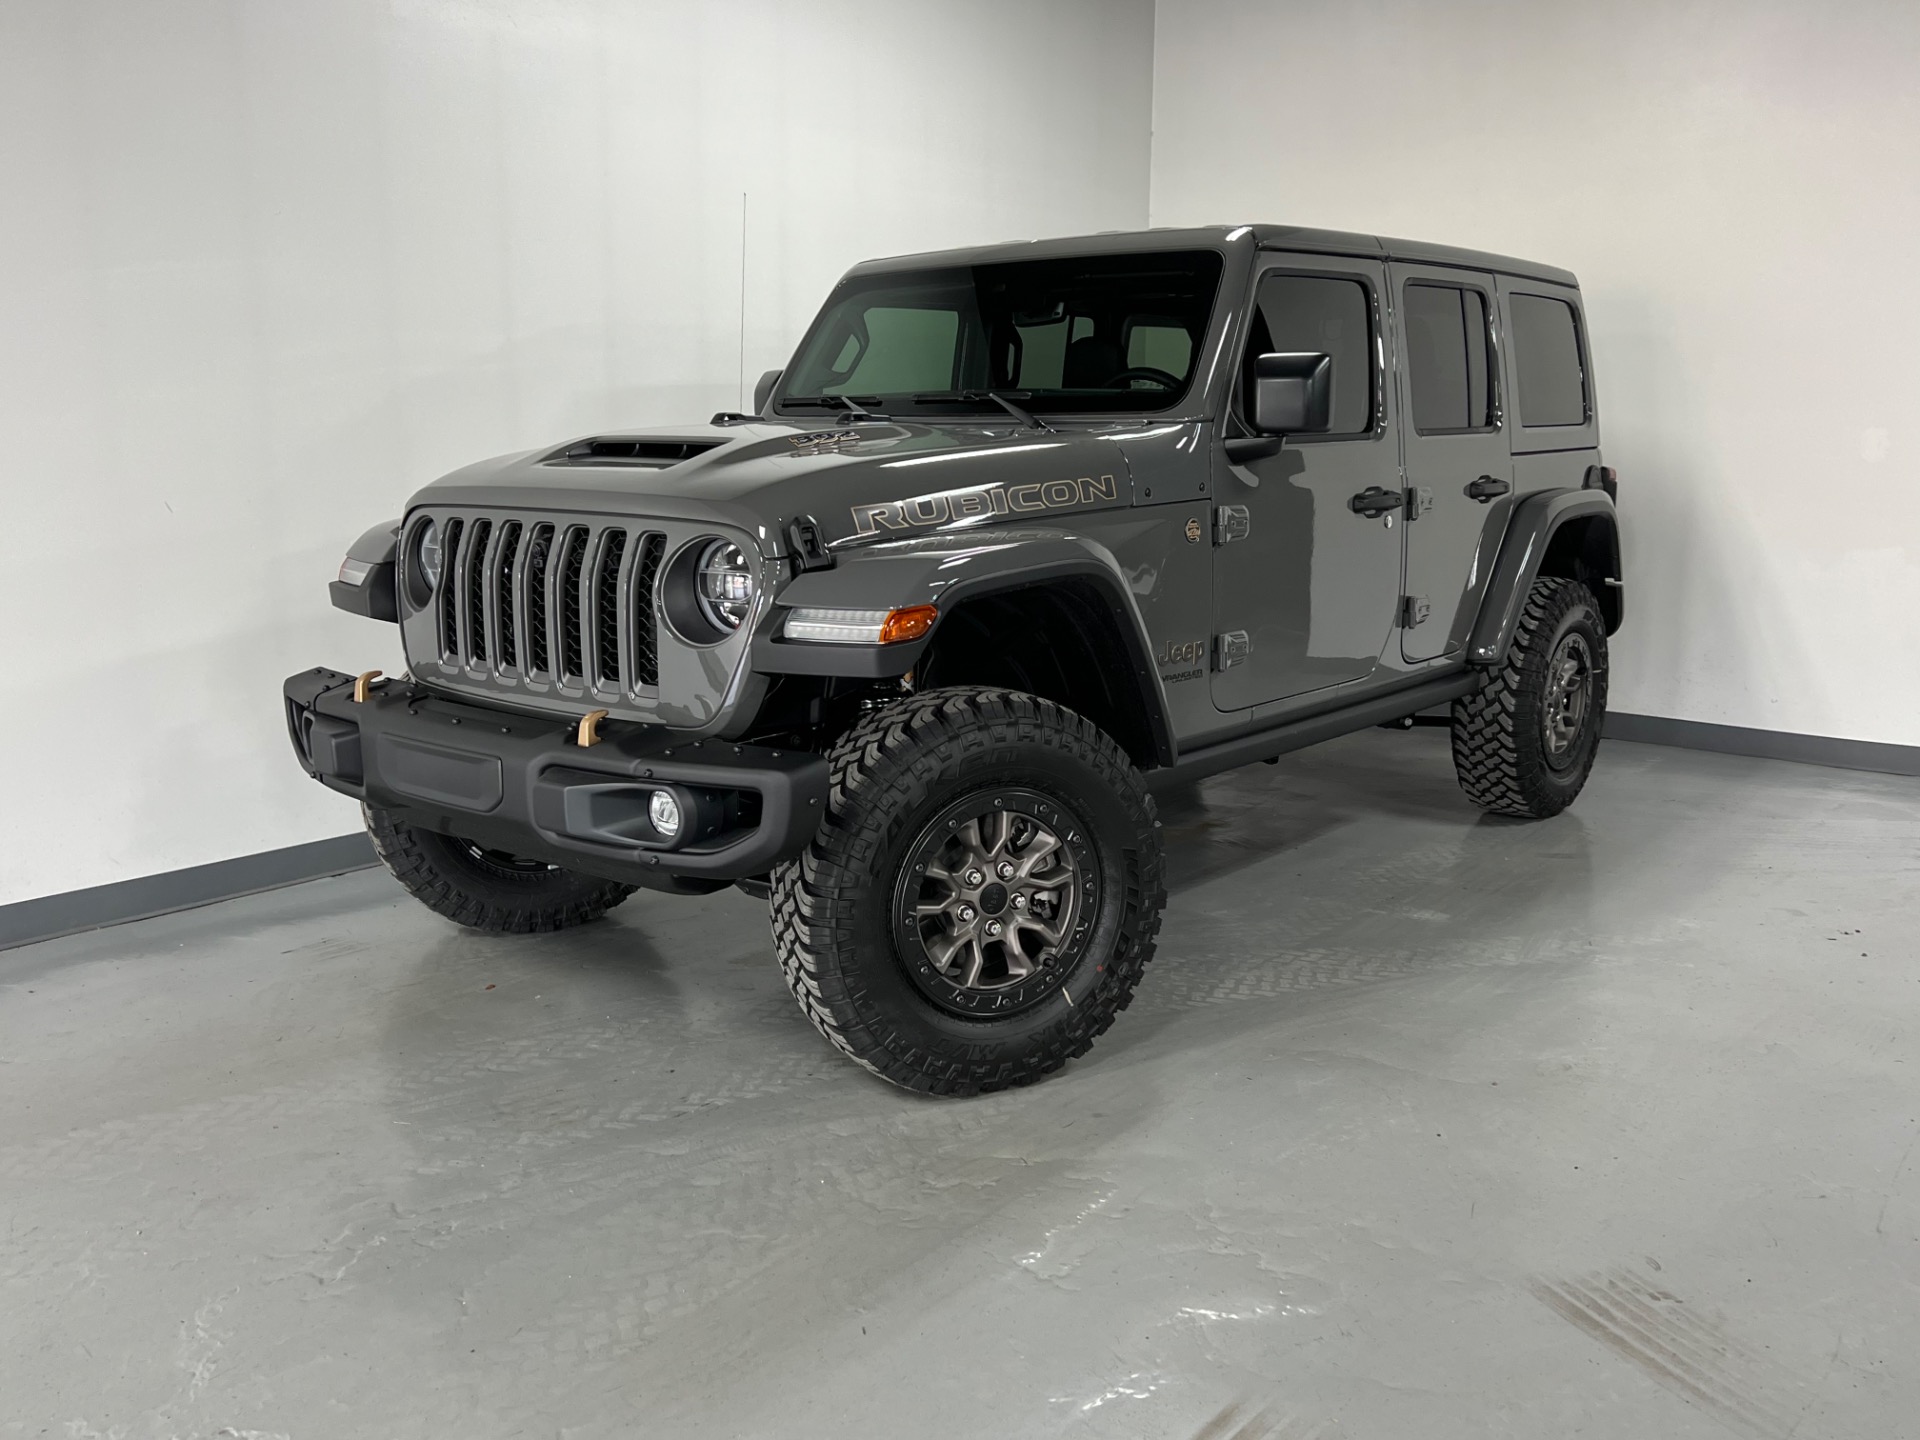 Used 2022 Sting-Gray Clear Coat Jeep Wrangler Unlimited RUBICON 392 4X4 470- hp v8 Rubicon 392 For Sale (Sold) | Prime Motorz Stock #3805